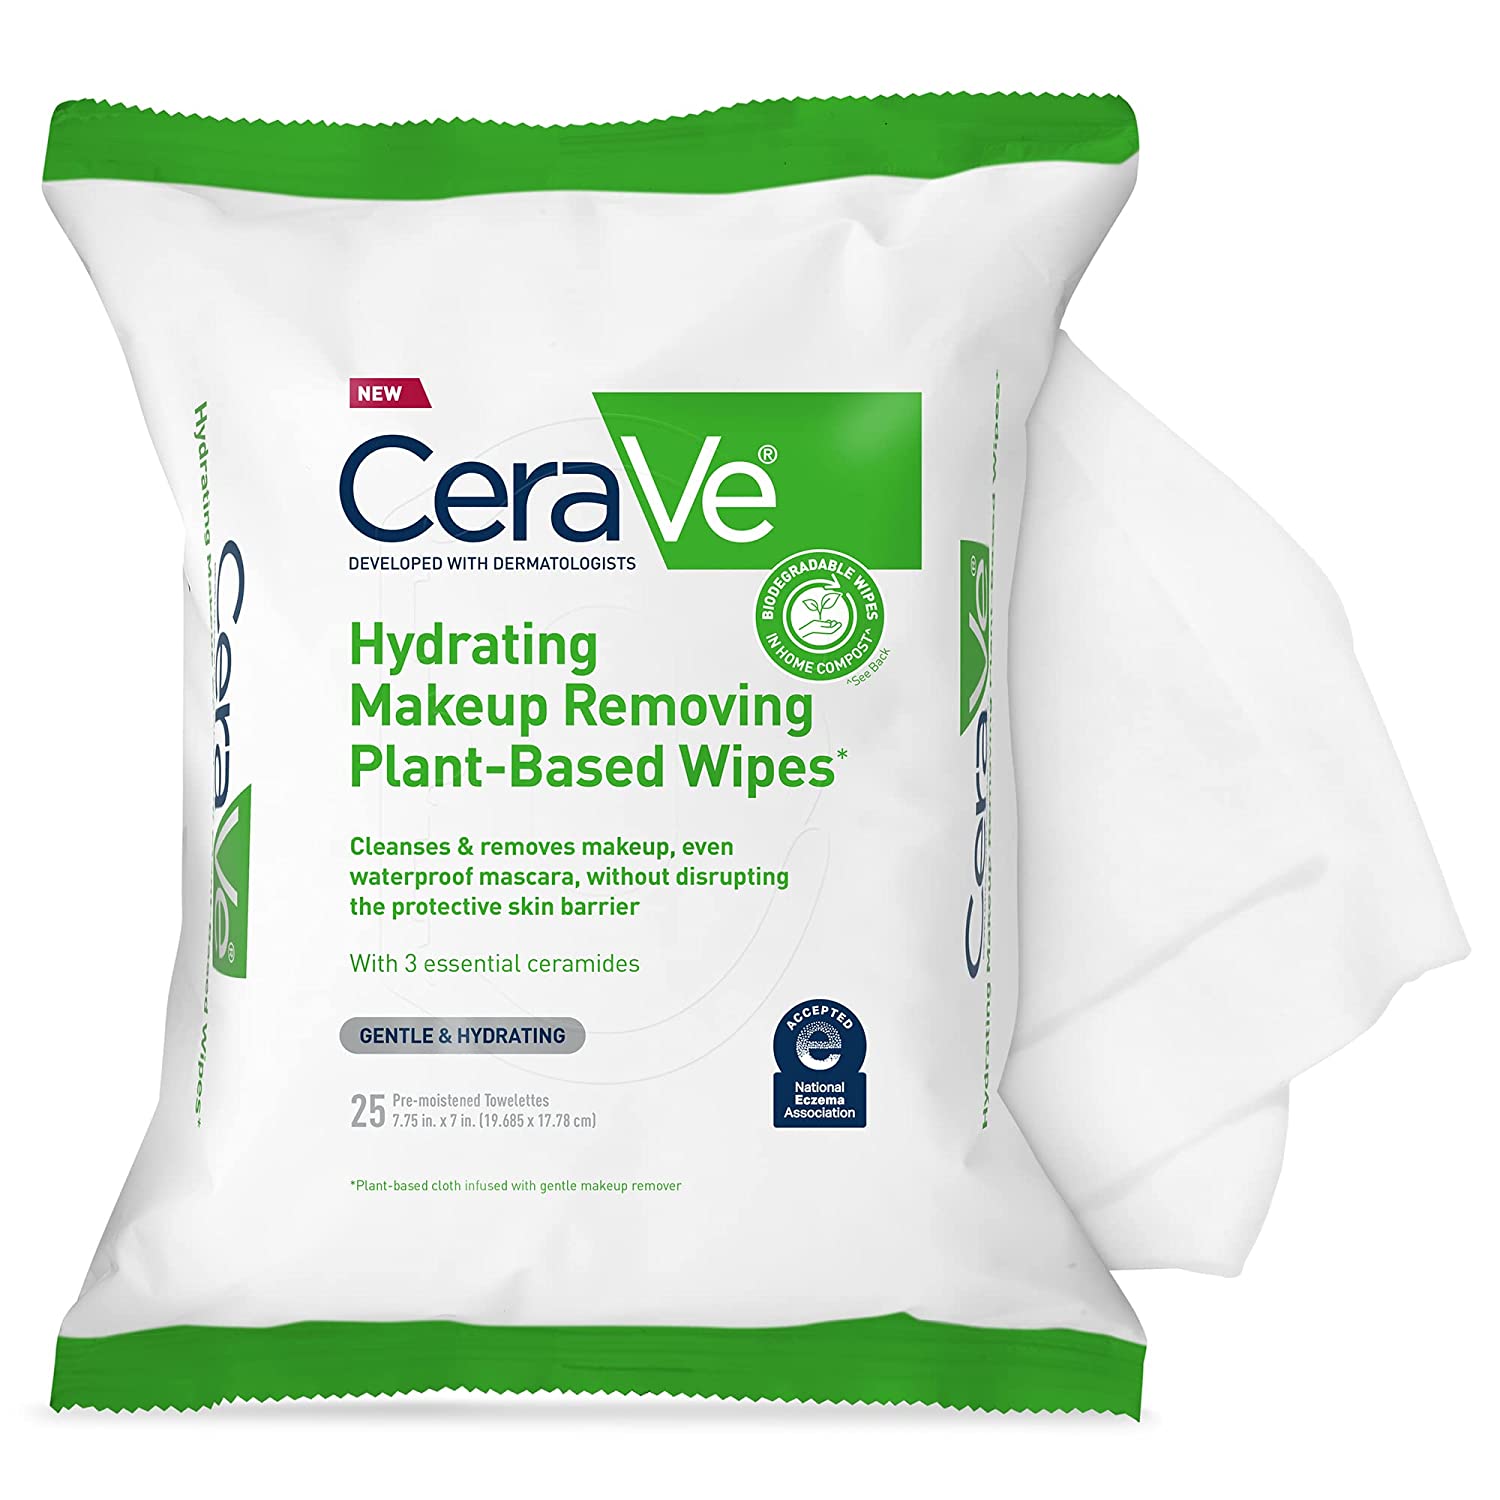 Hydrating Makeup Removing Plant-Based Wipes